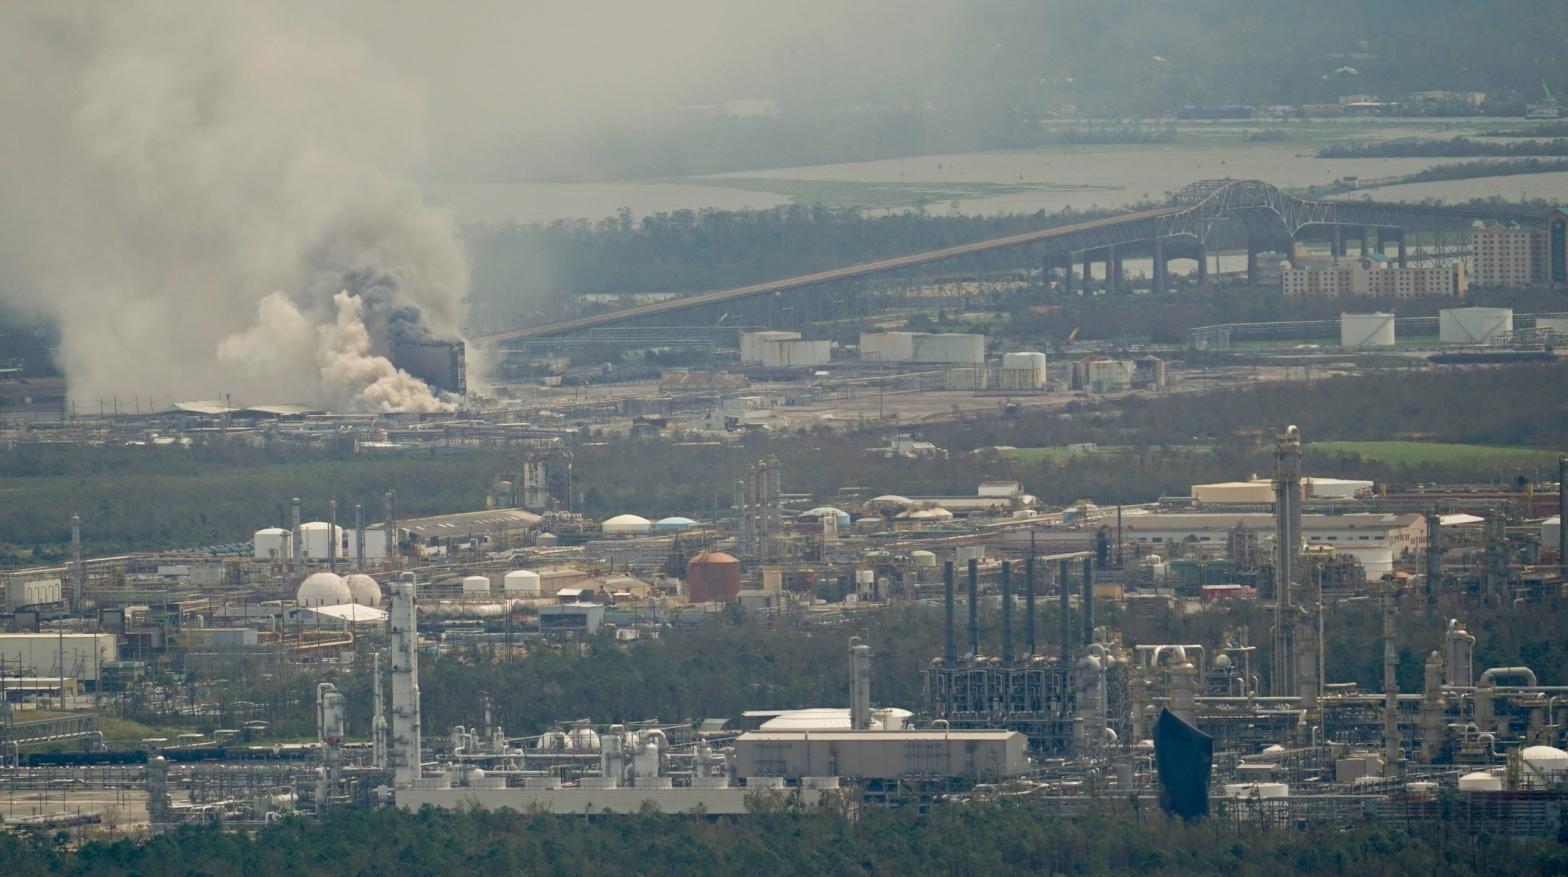 A chemical fire burns at a Biolab manufacturing facility during the aftermath of Hurricane Laura Thursday, Aug. 27, 2020, near Lake Charles, Louisiana. (Photo: David J. Phillip, AP)